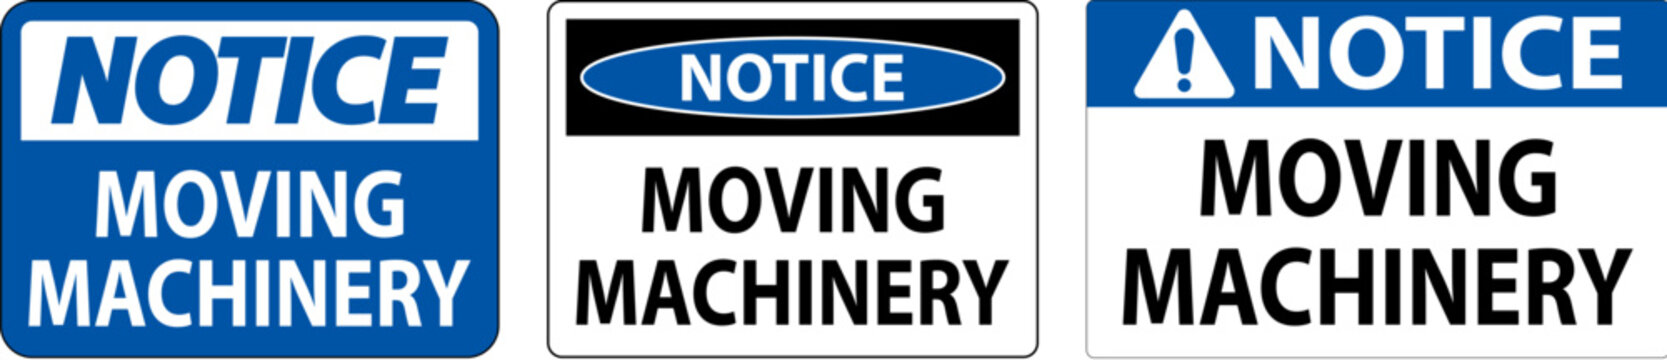 Notice Moving Machinery Sign On White Background